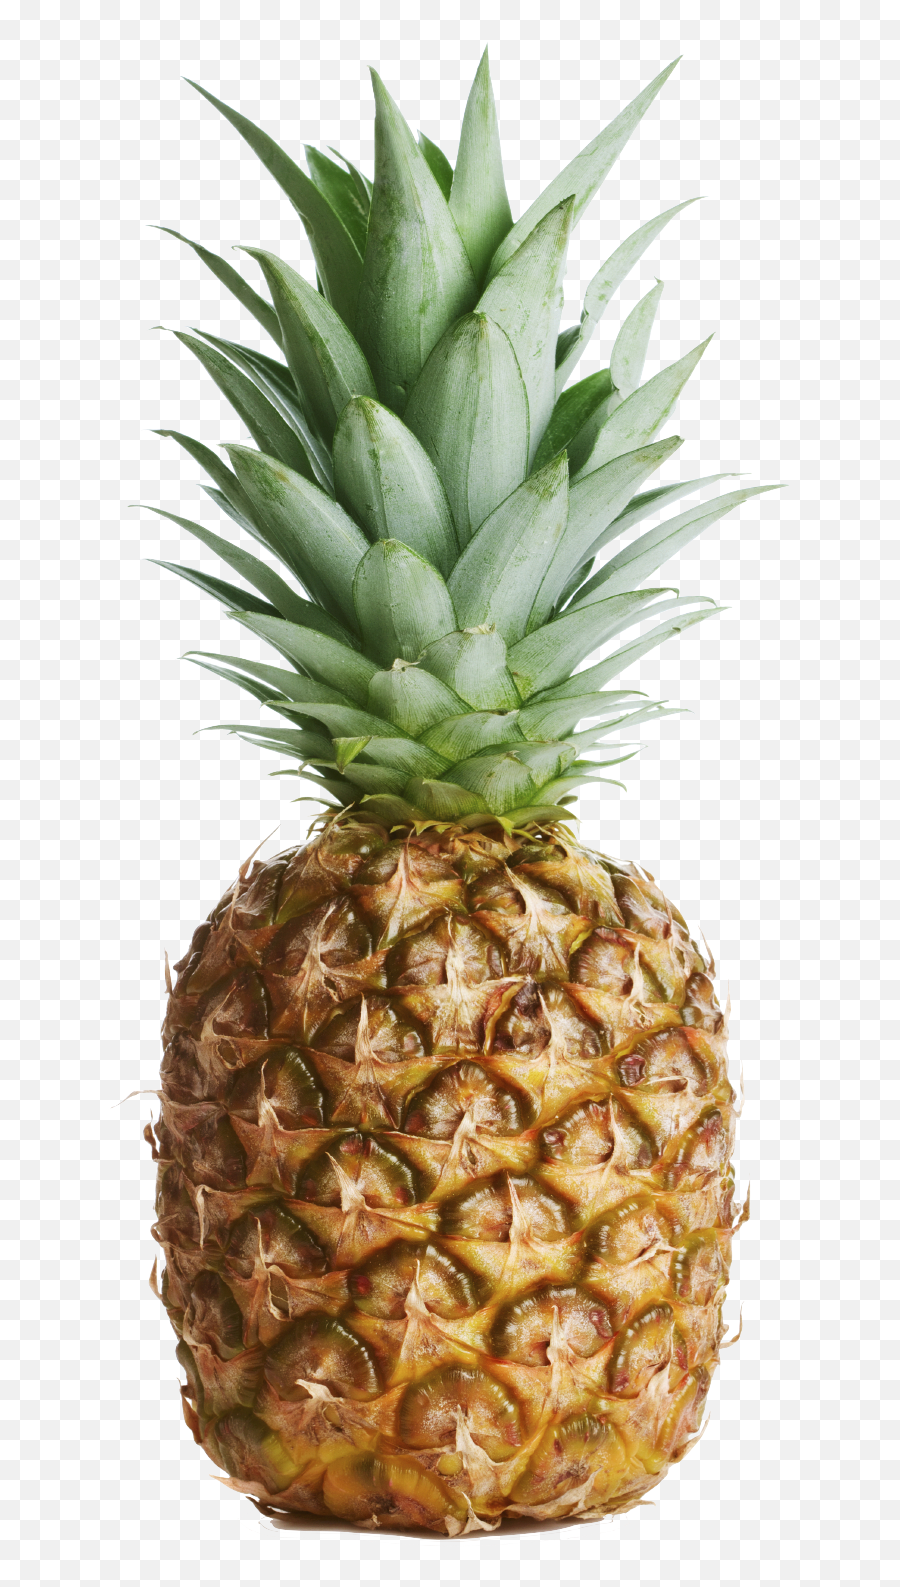 Png Pineapple No Background - Pineapple With No Background,Pineapples Png